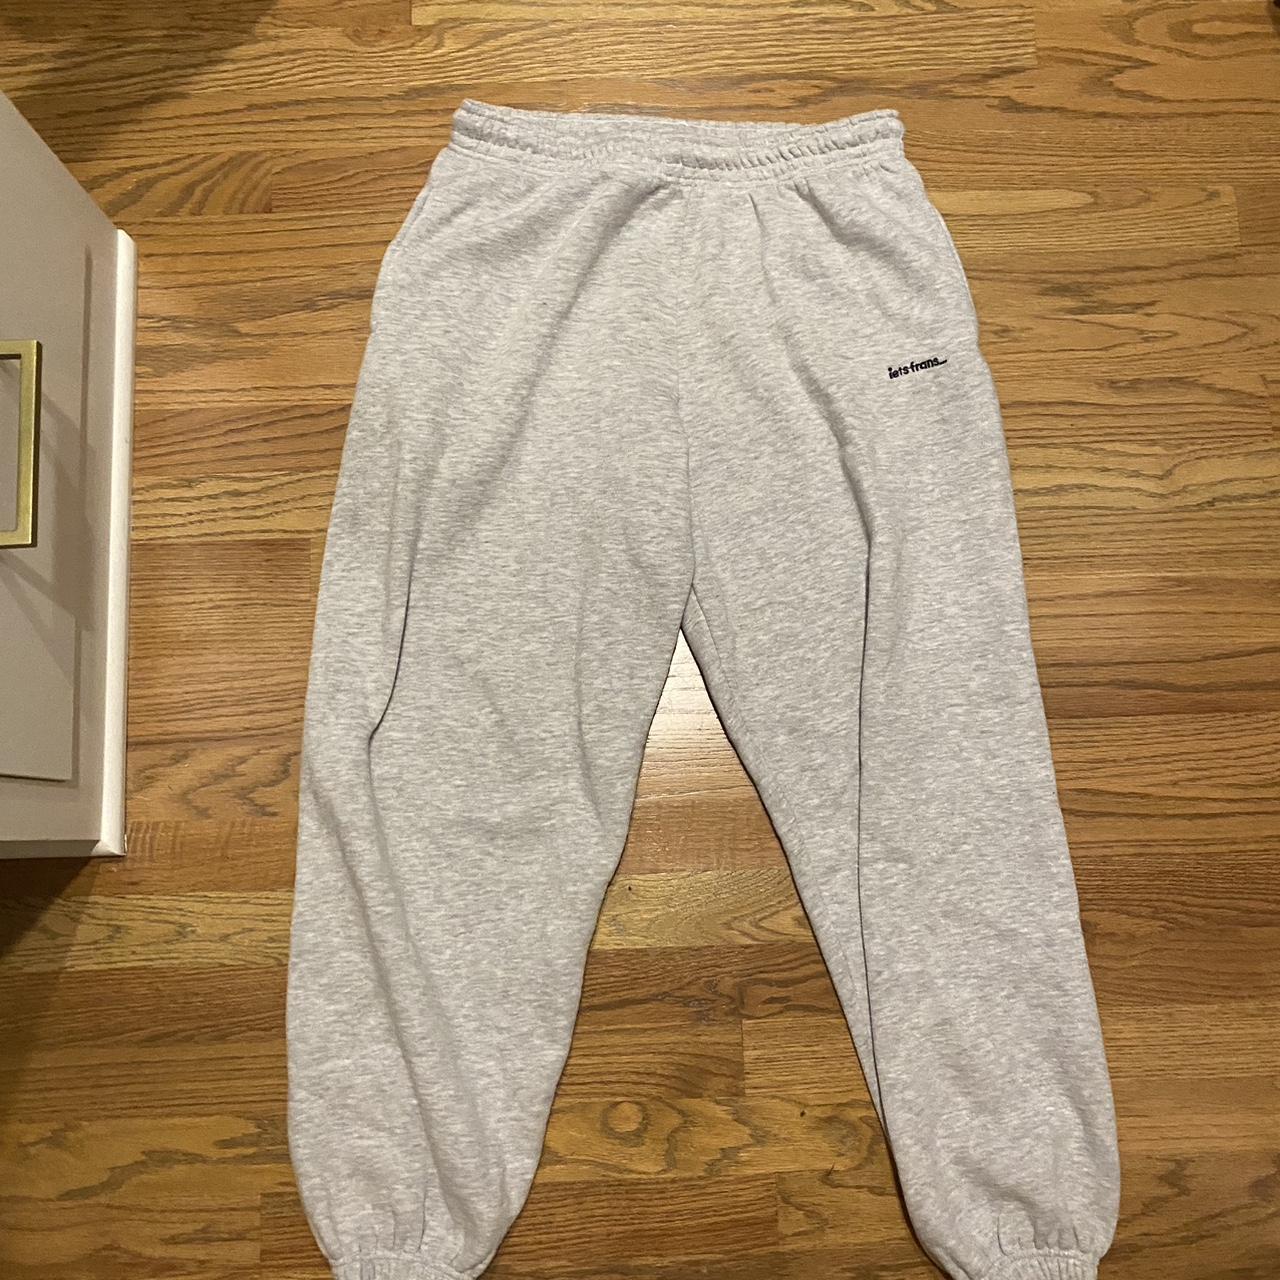 iets frans... Men's Grey and White Joggers-tracksuits | Depop